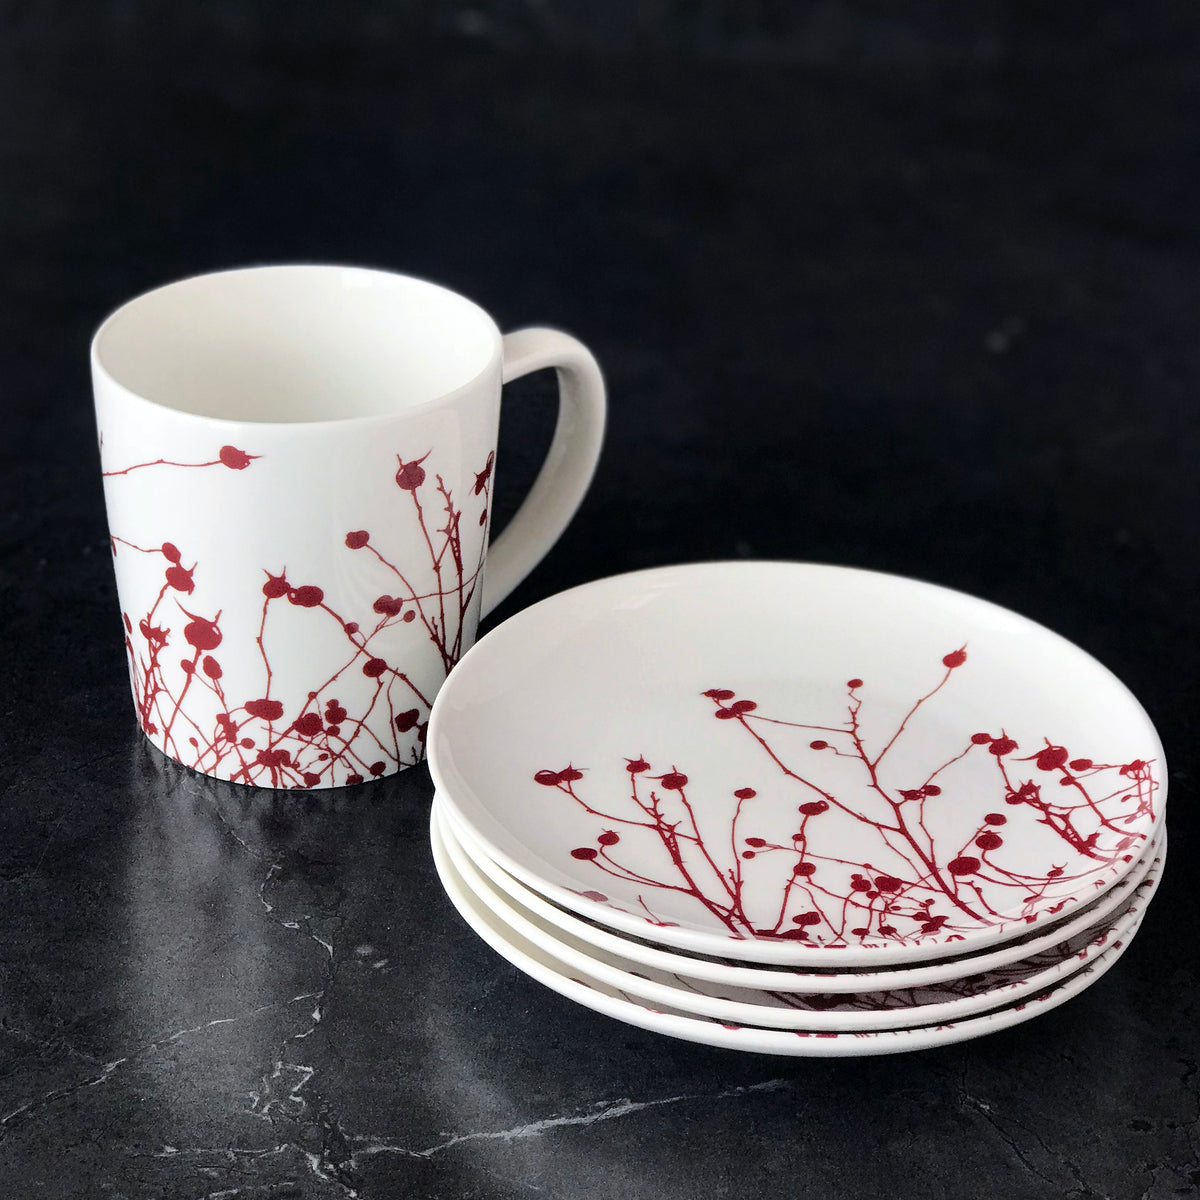 A white mug and a stack of three Winterberries Small Plates from Caskata Artisanal Home, crafted from heirloom-quality porcelain, are decorated with a red floral design resembling winter berries on a dark surface.